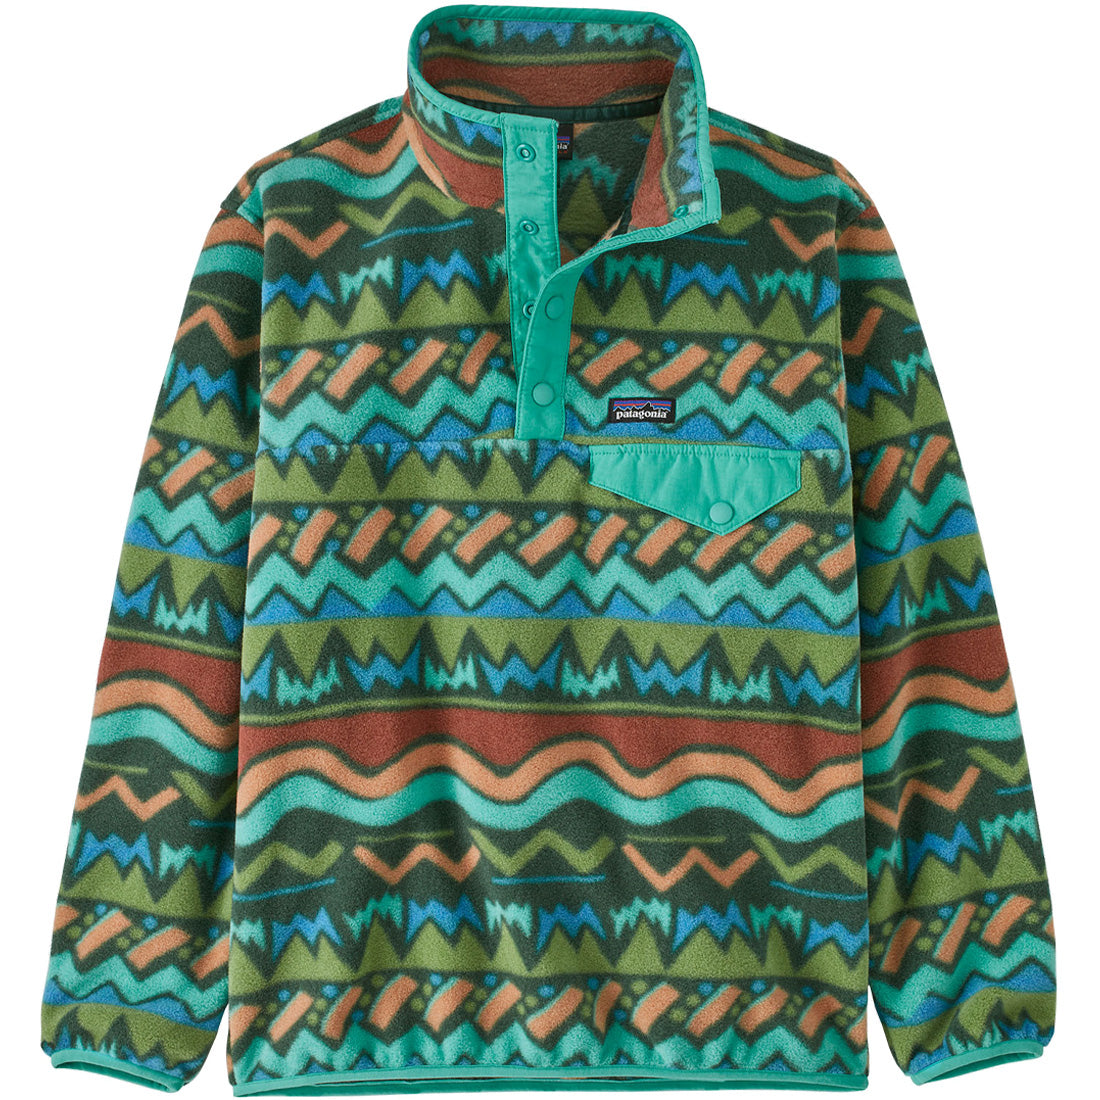 Patagonia Lightweight Synchilla Snap-T Fleece Pullover - Kids